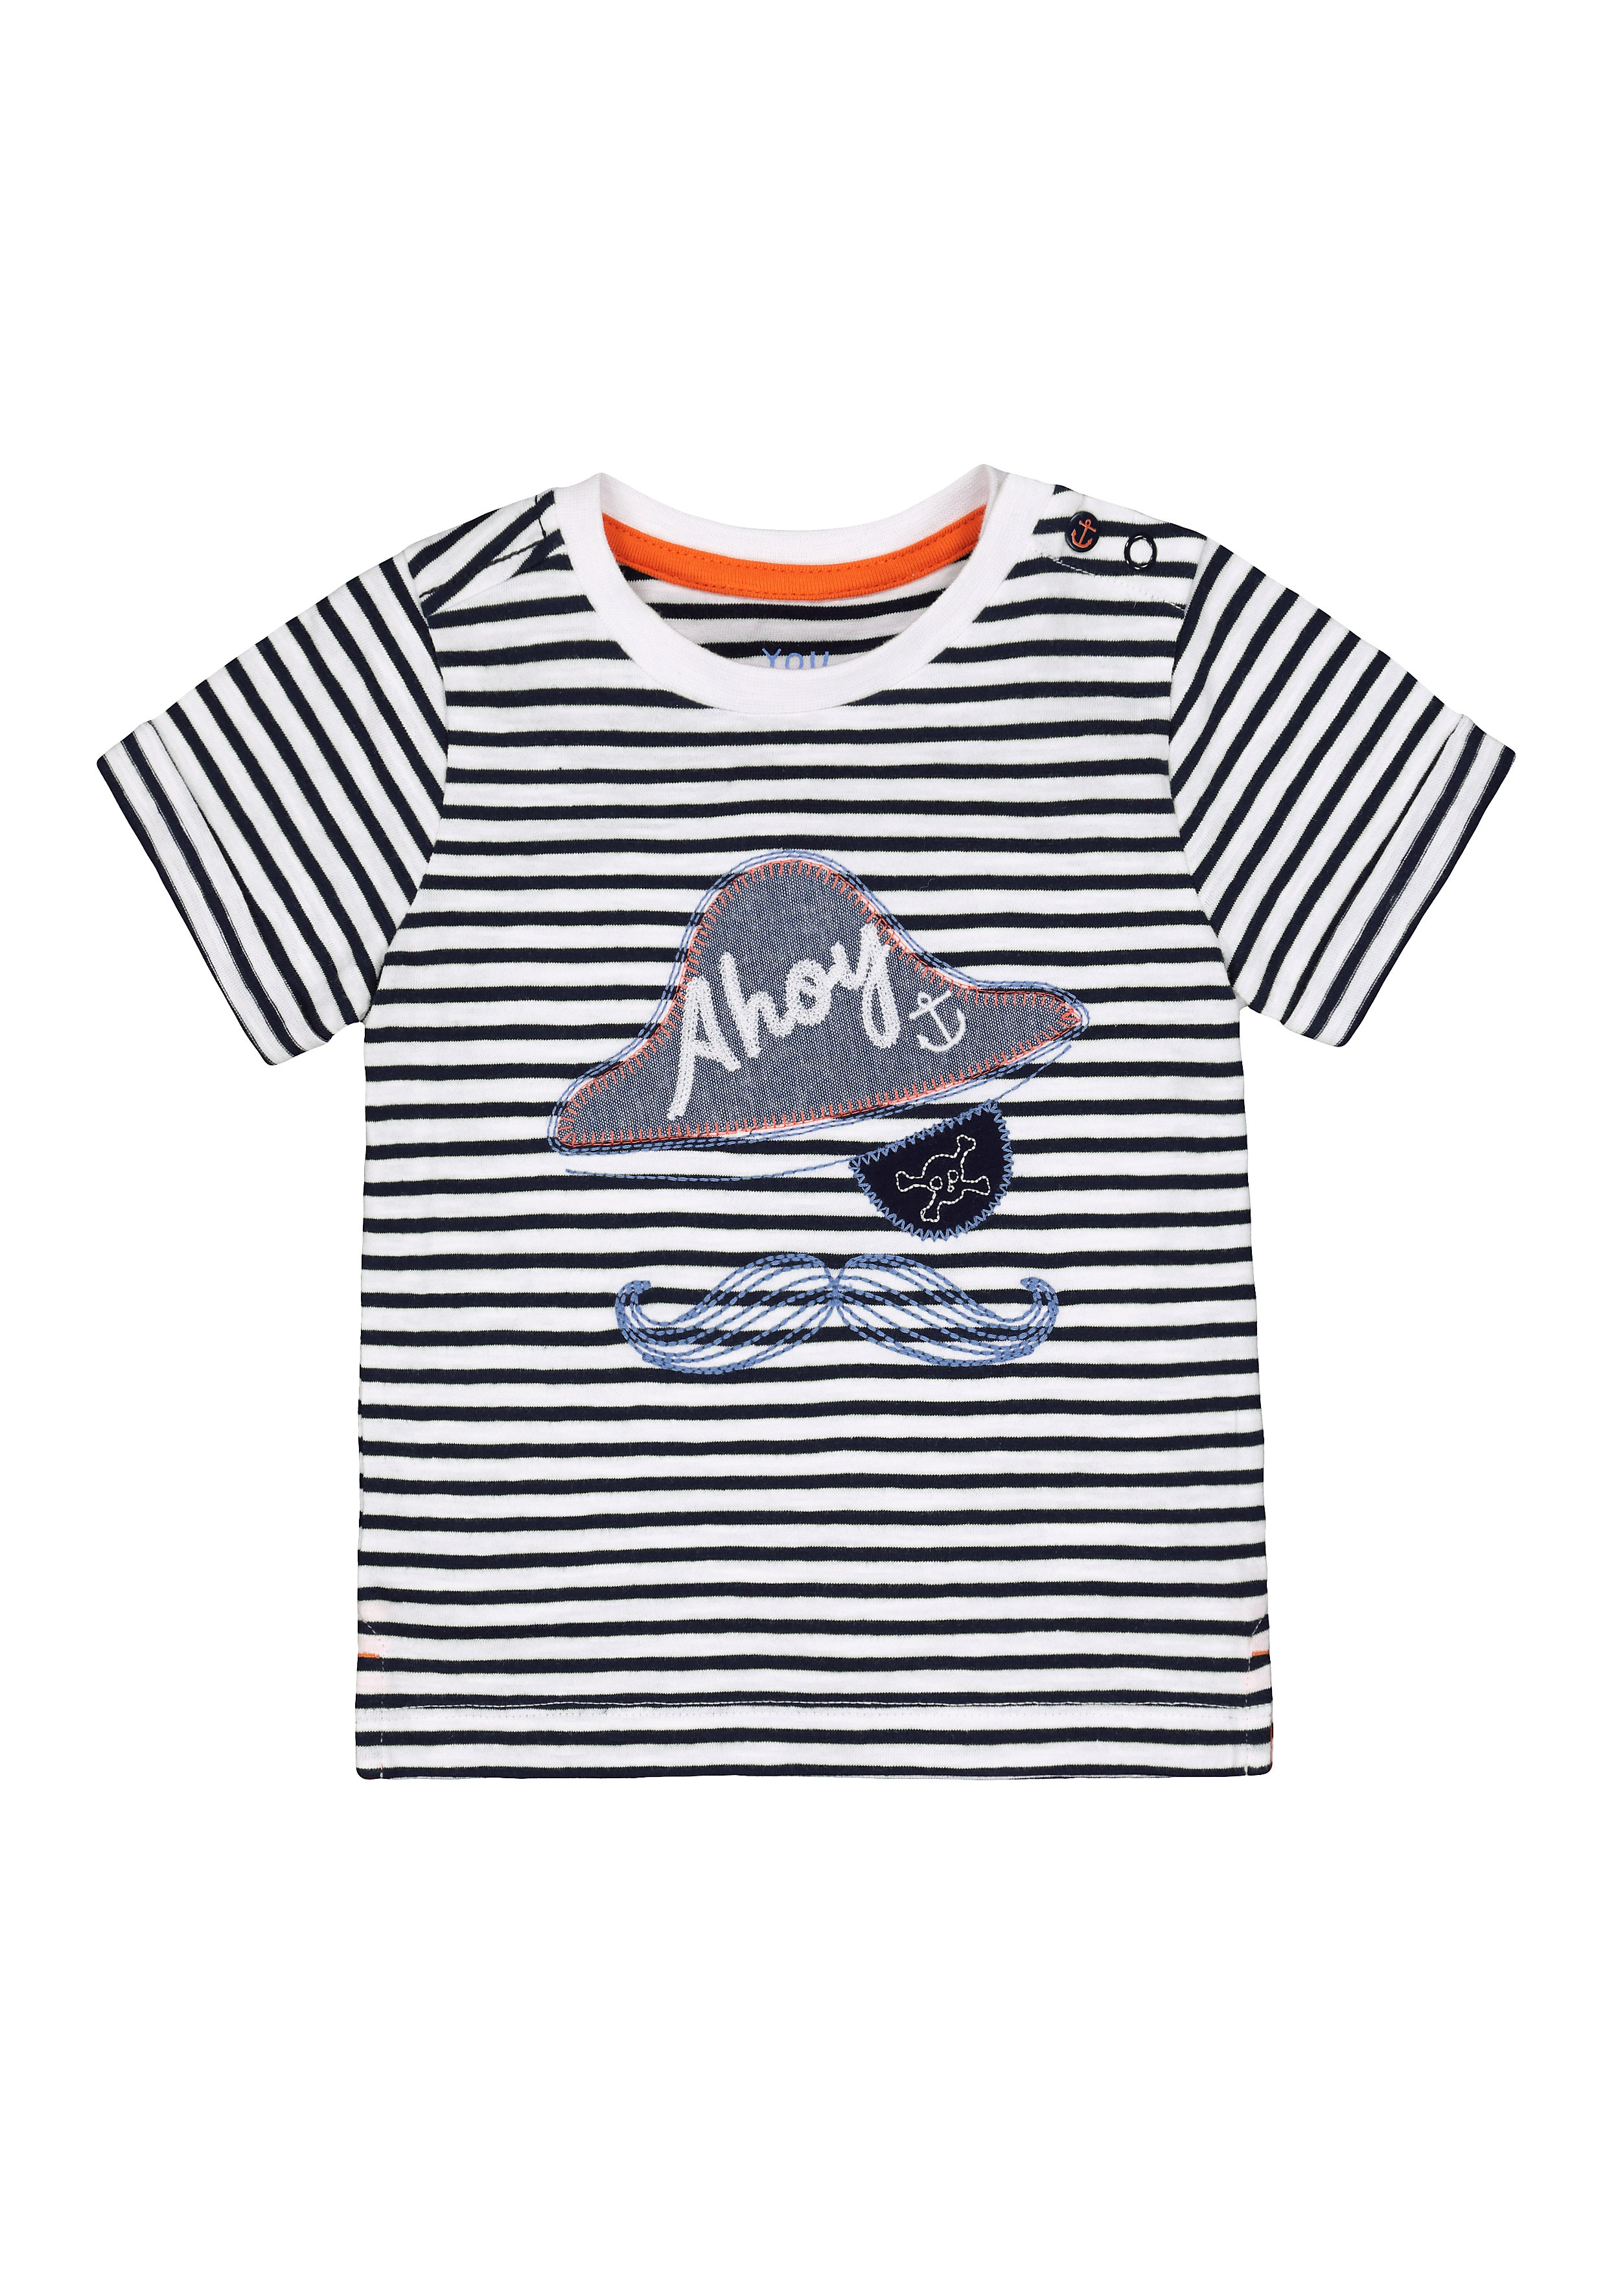 Boys Half Sleeves T-Shirt Pirate Patchwork - Multicolor